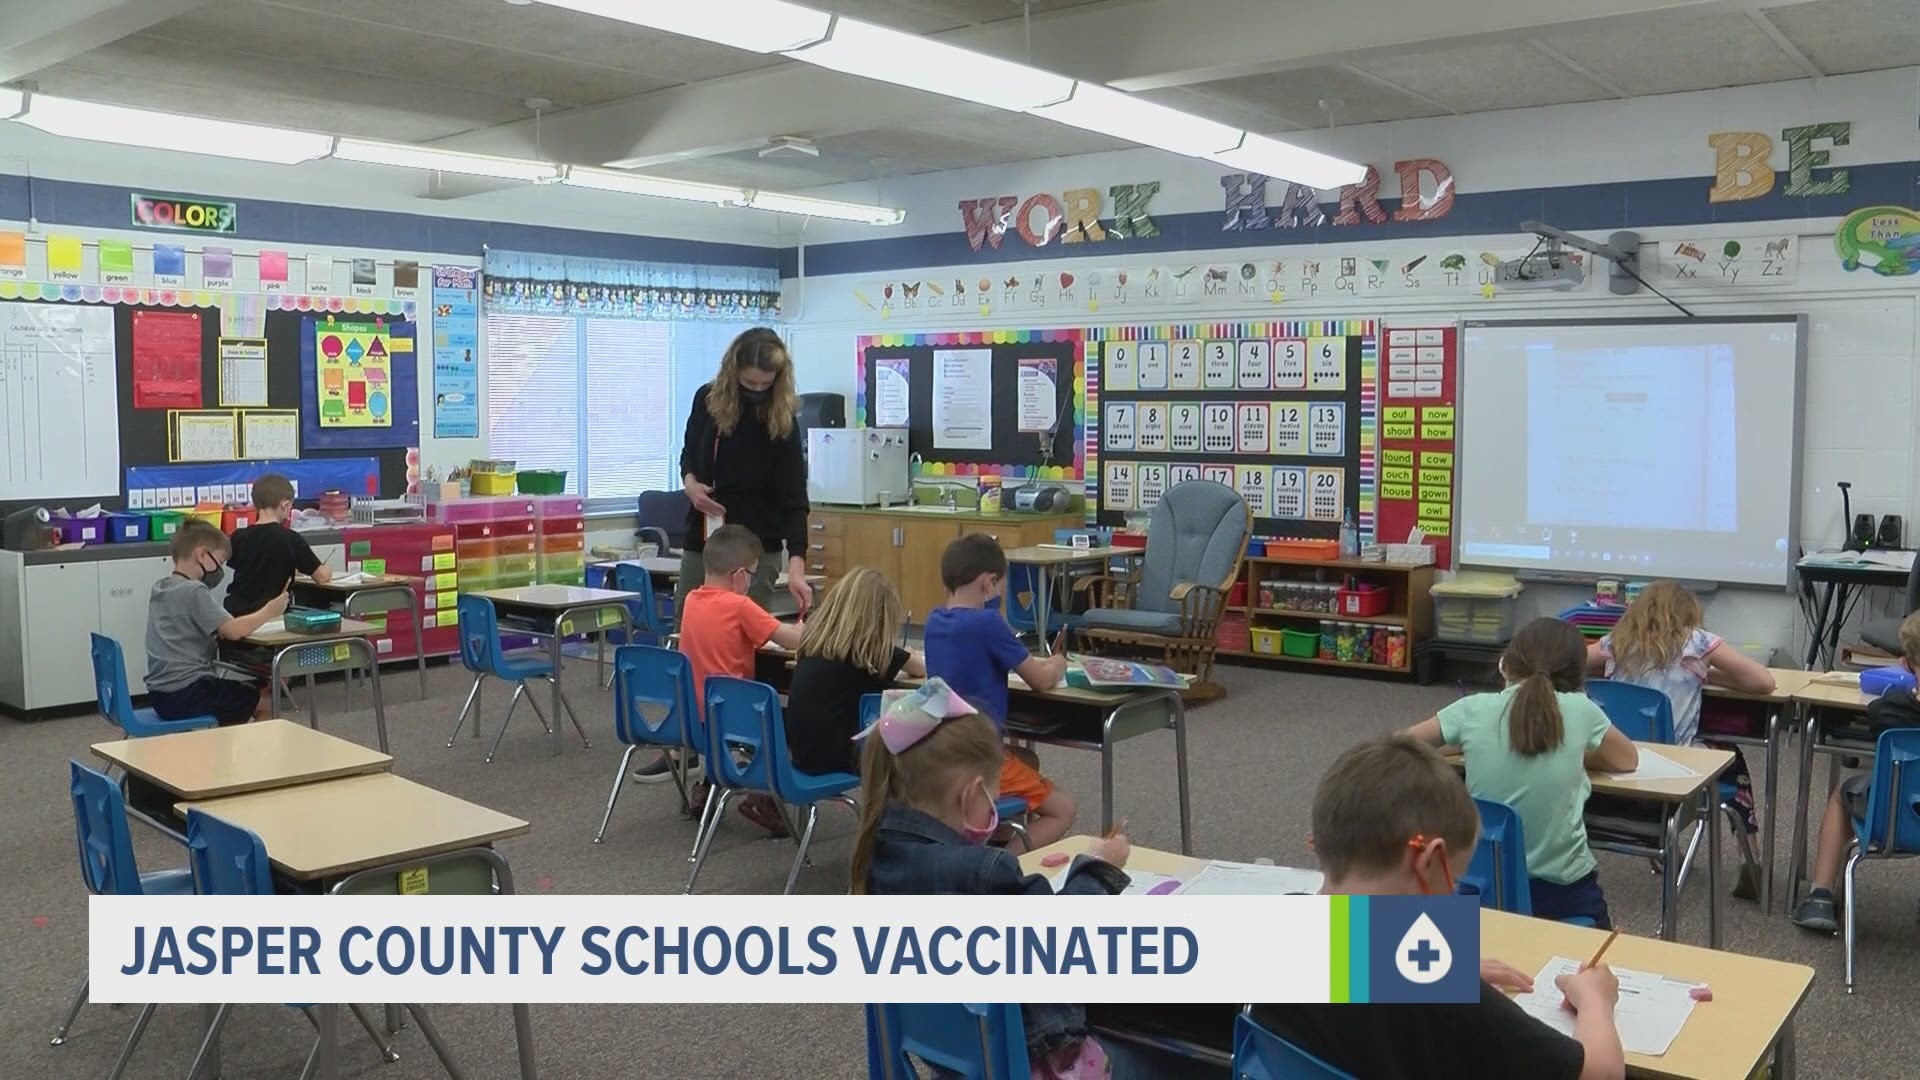 Colfax-Mingo CSD Superintendent Erik Anderson says two-thirds of the district's staff has been completely vaccinated.